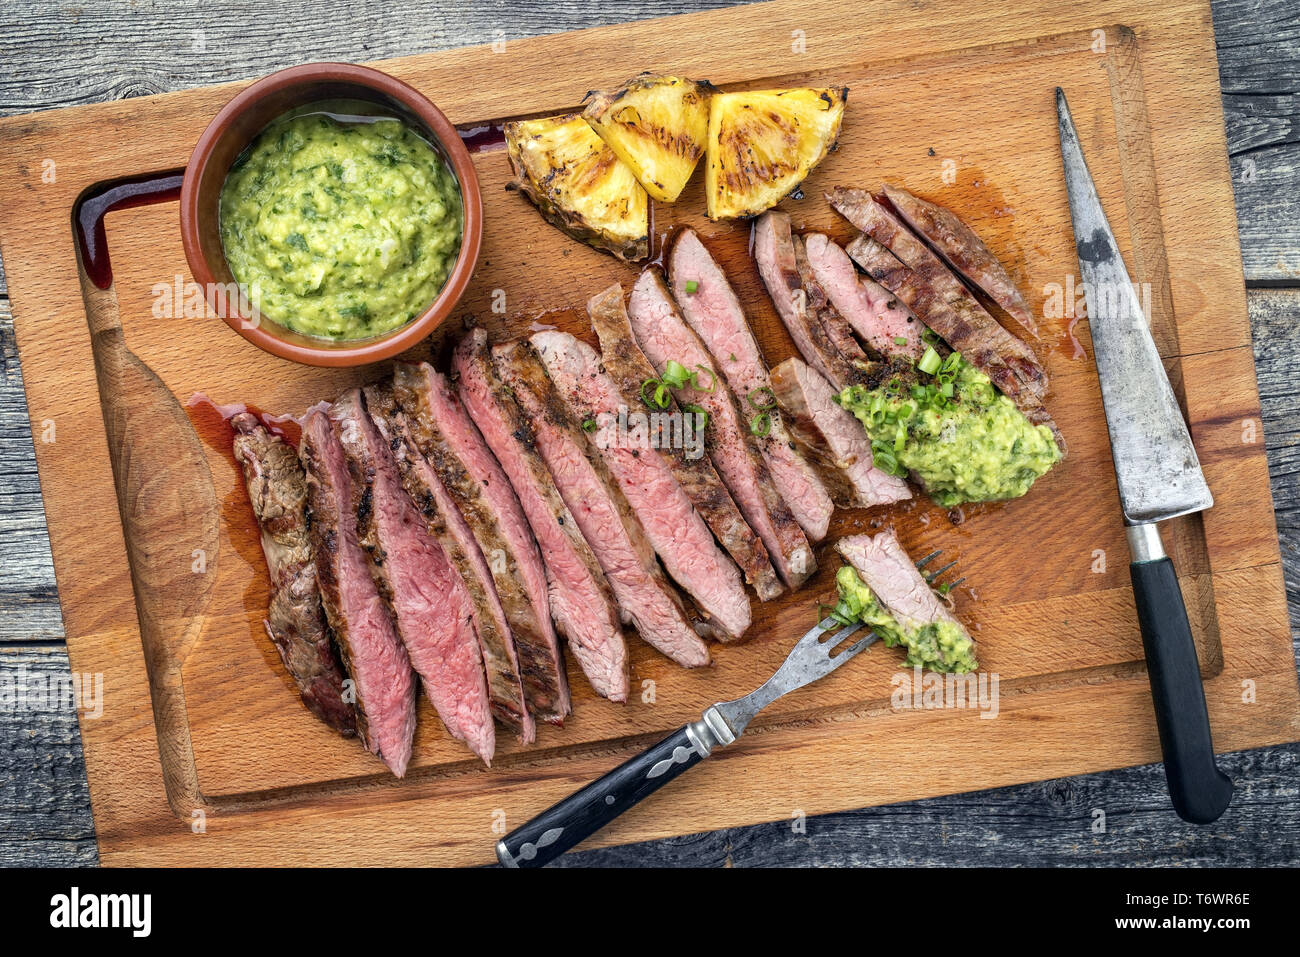 Flat Iron Steak High Resolution Stock Photography and Images - Alamy